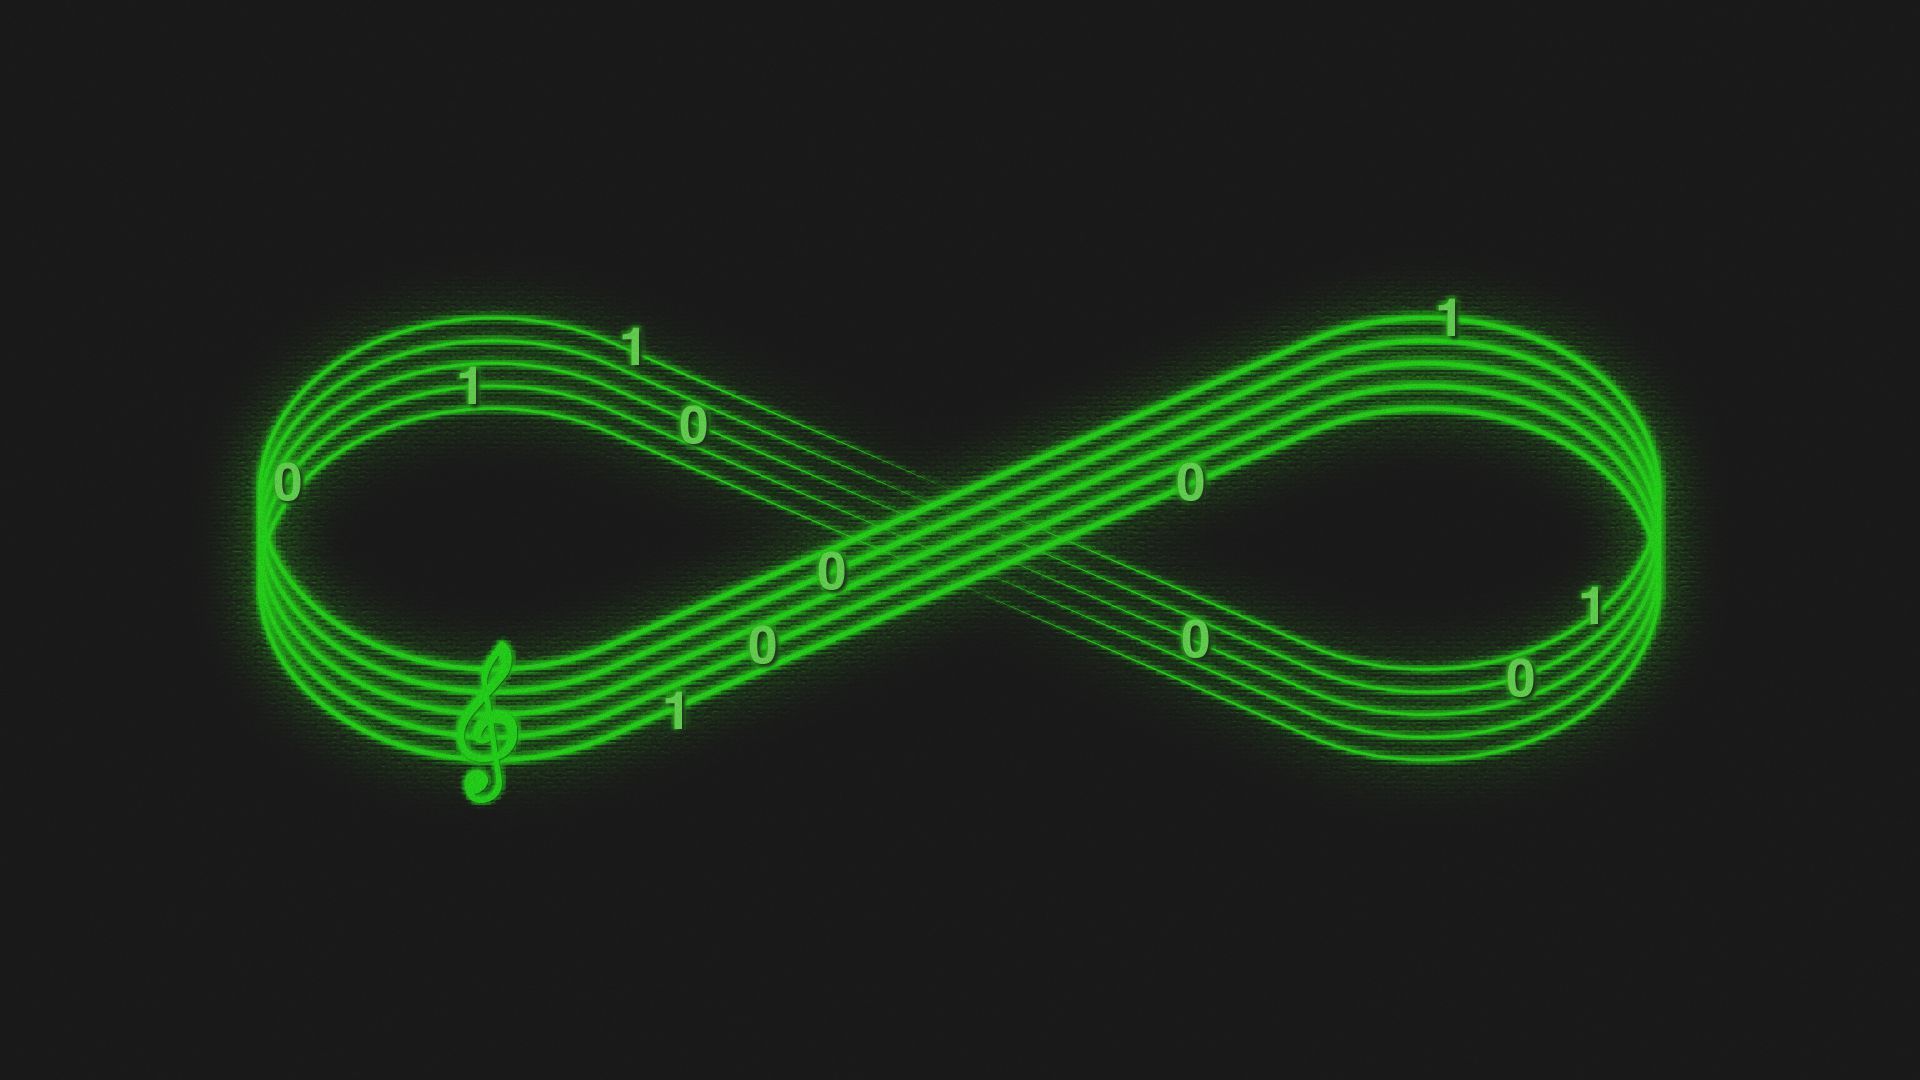 Illustration of the shape for infinity made from a music staff with ones and zeros on it instead of music notes.